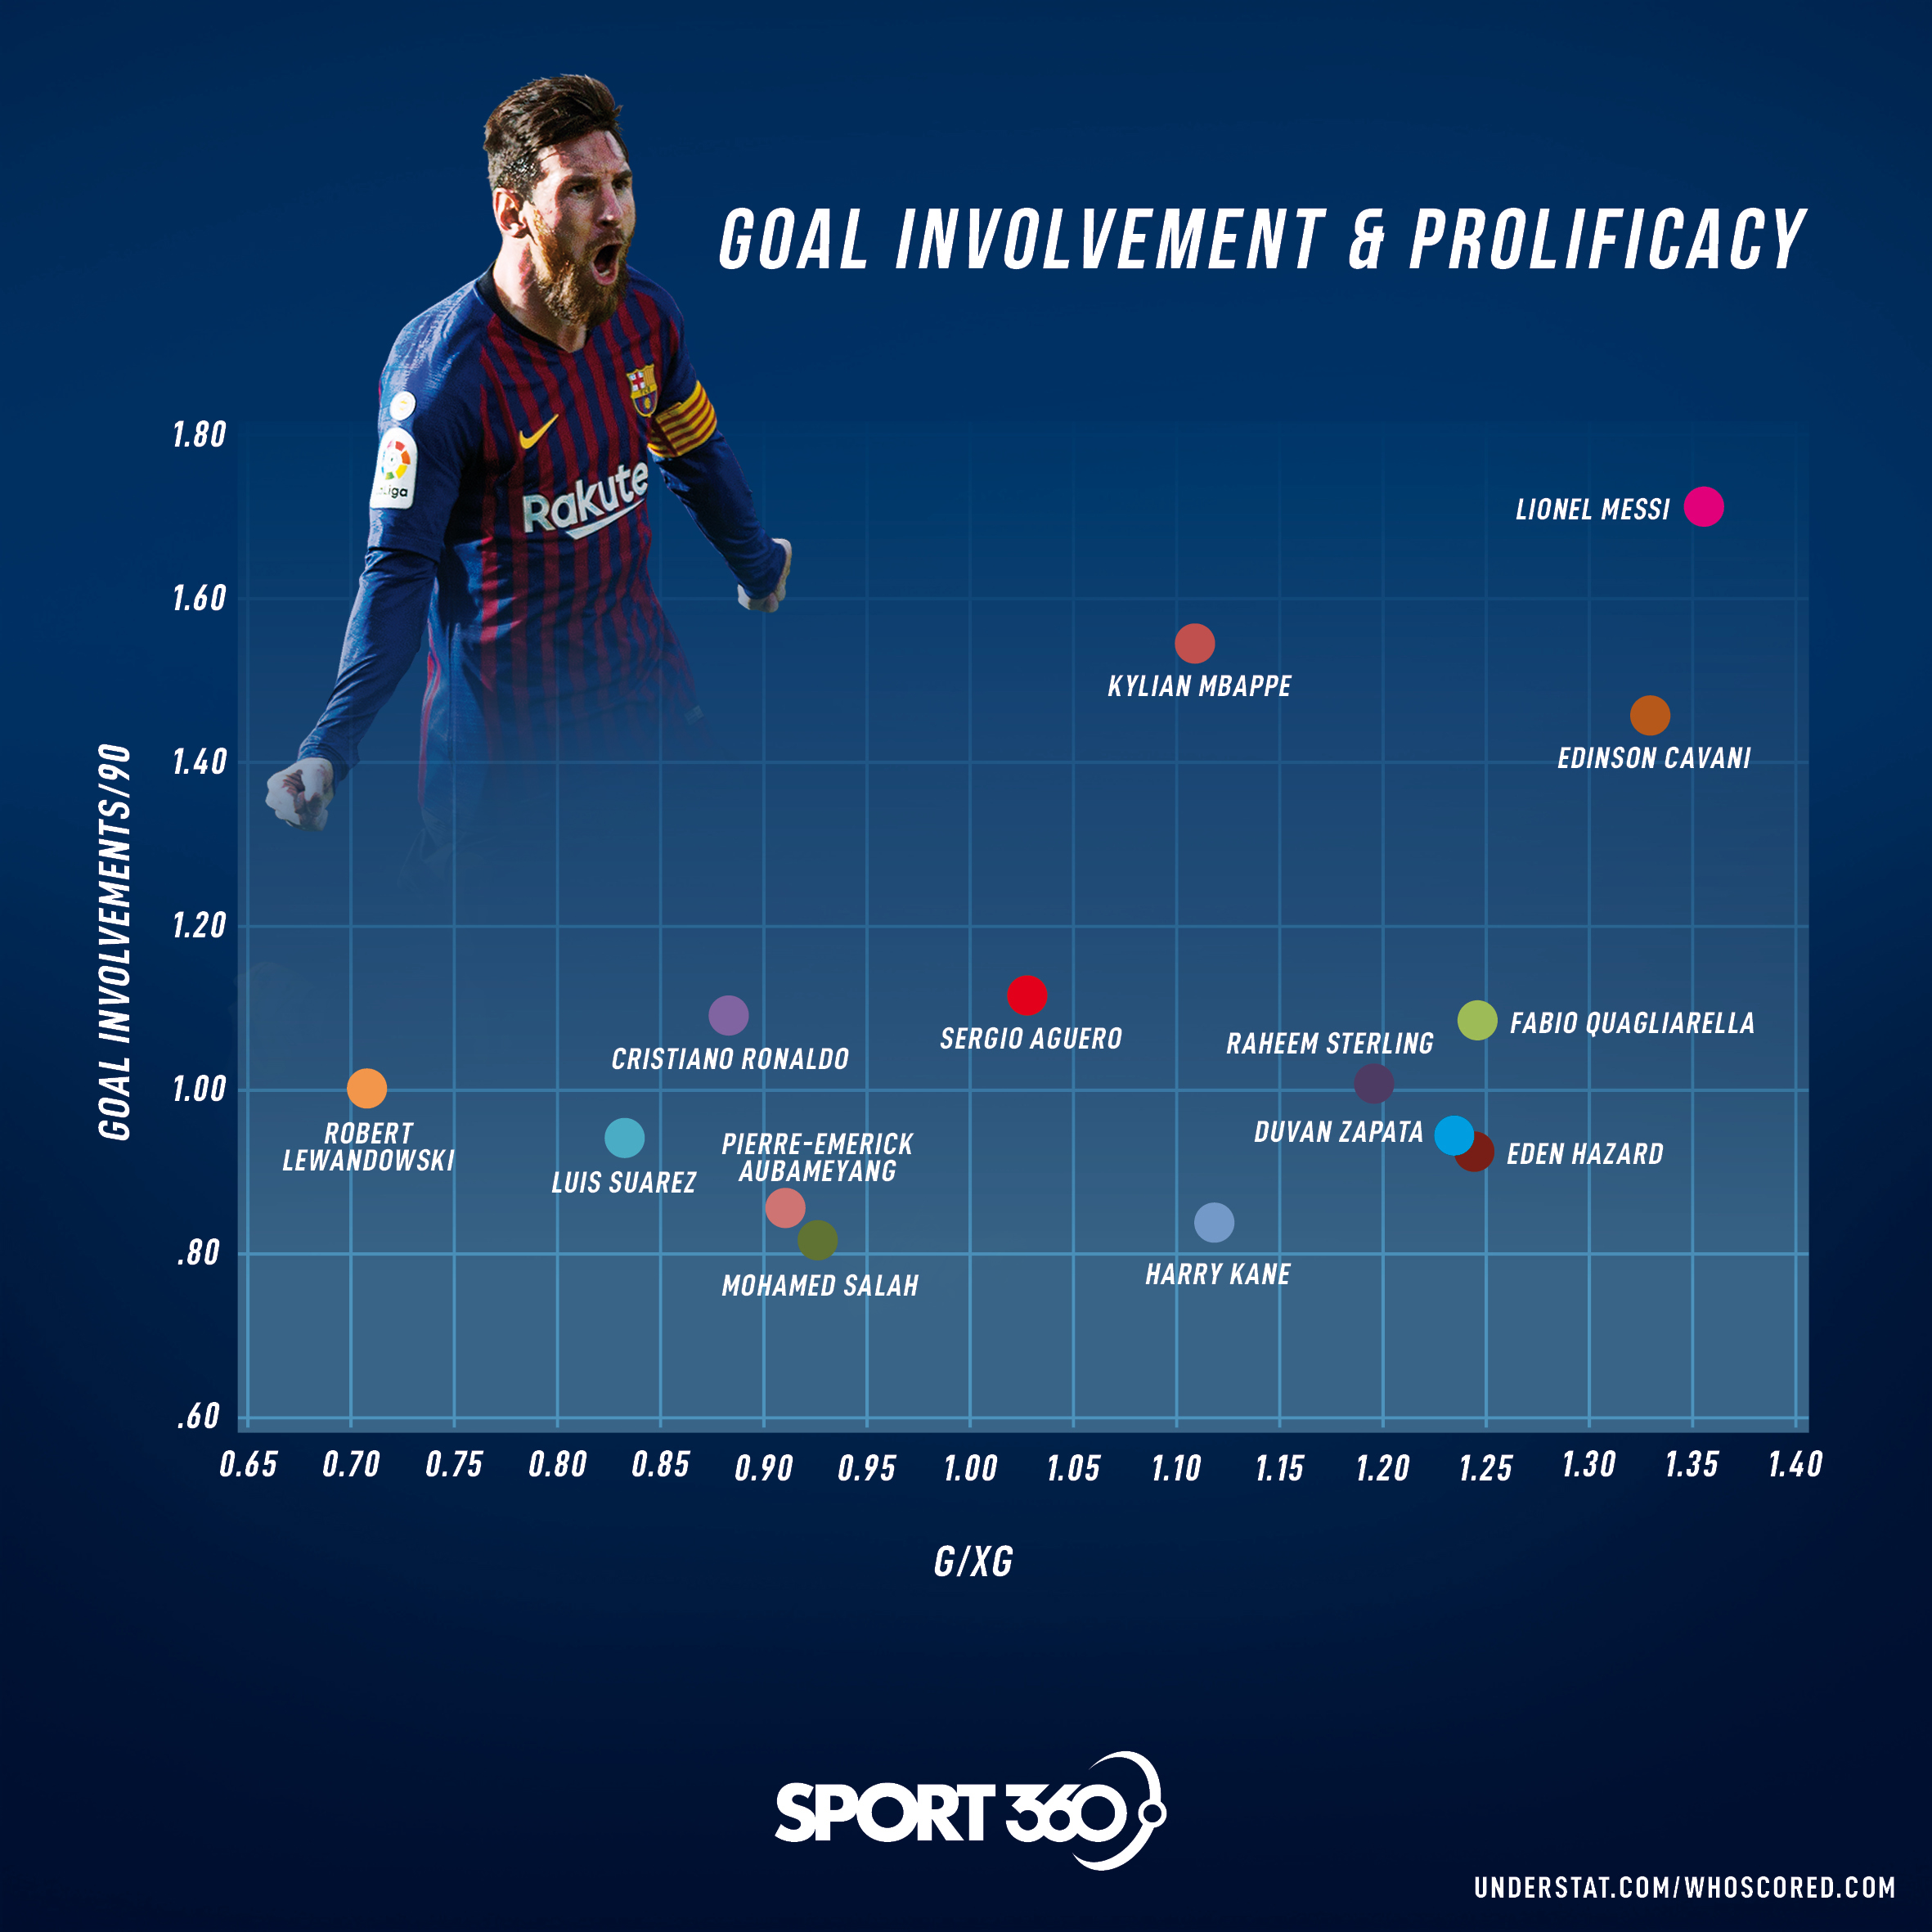 As a result of the Messi goal in comparison with the best in the industry